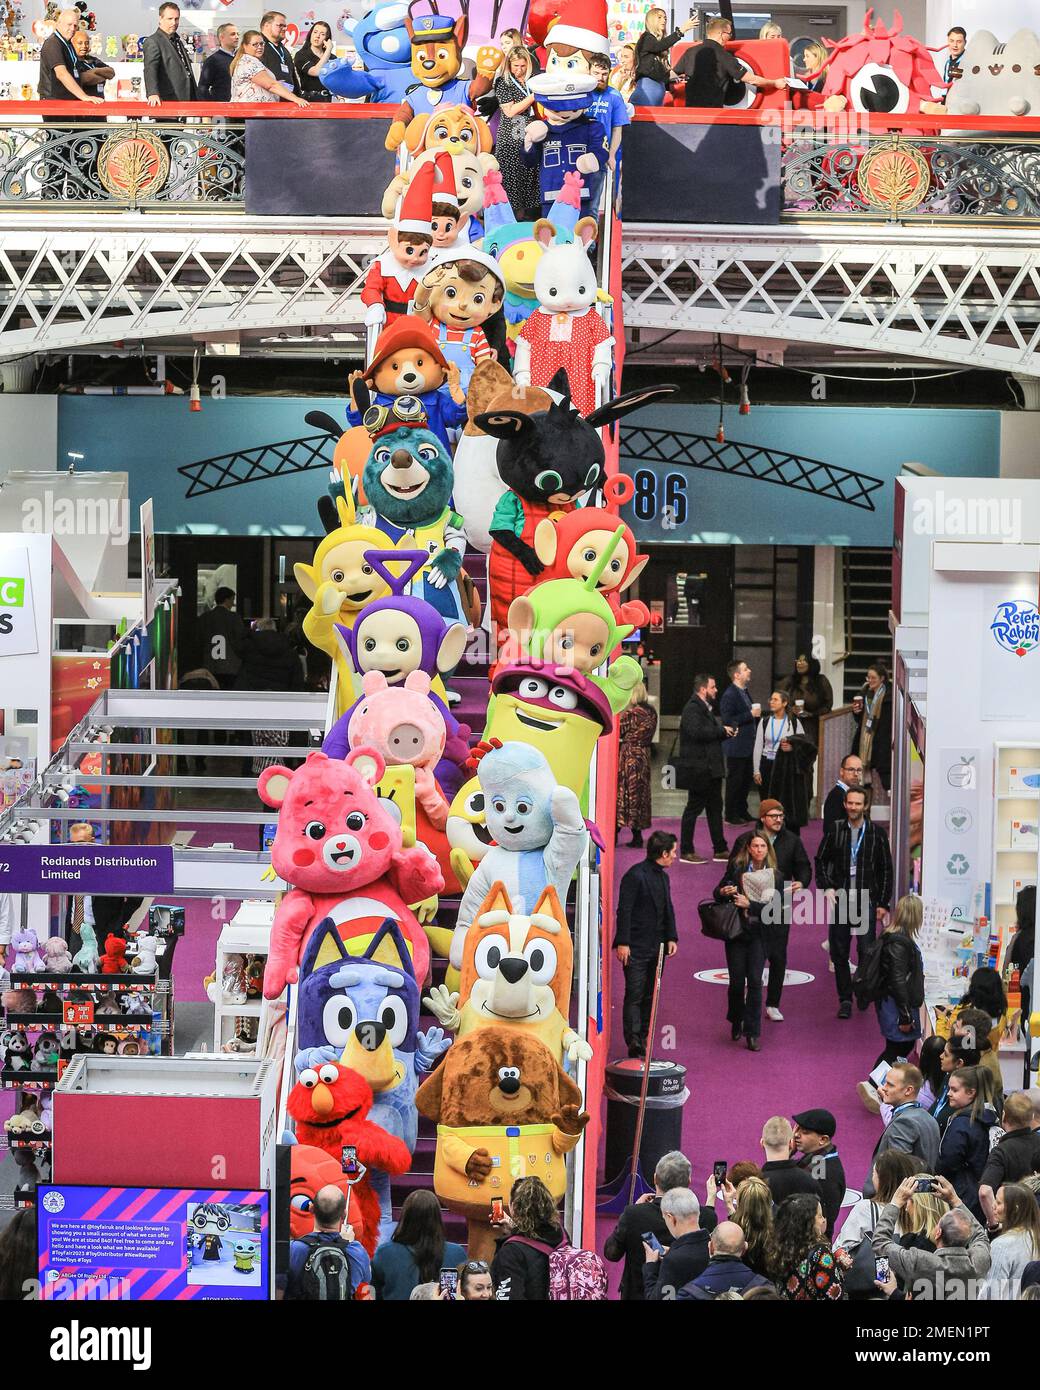 London, UK. 24th Jan, 2023. Opening photocall with the giant toy characters, including favourites like the Teletubbies, Paddingdon Bear and others, who pose and walk around on press day. The Toy Fair opens its doors at Kensington Olympia to showcase the latest trends in the toy industry. The Toy Fair is the UK's largest dedicated toy, game and hobby trade show with more than 260 exhibitors. Credit: Imageplotter/Alamy Live News Stock Photo